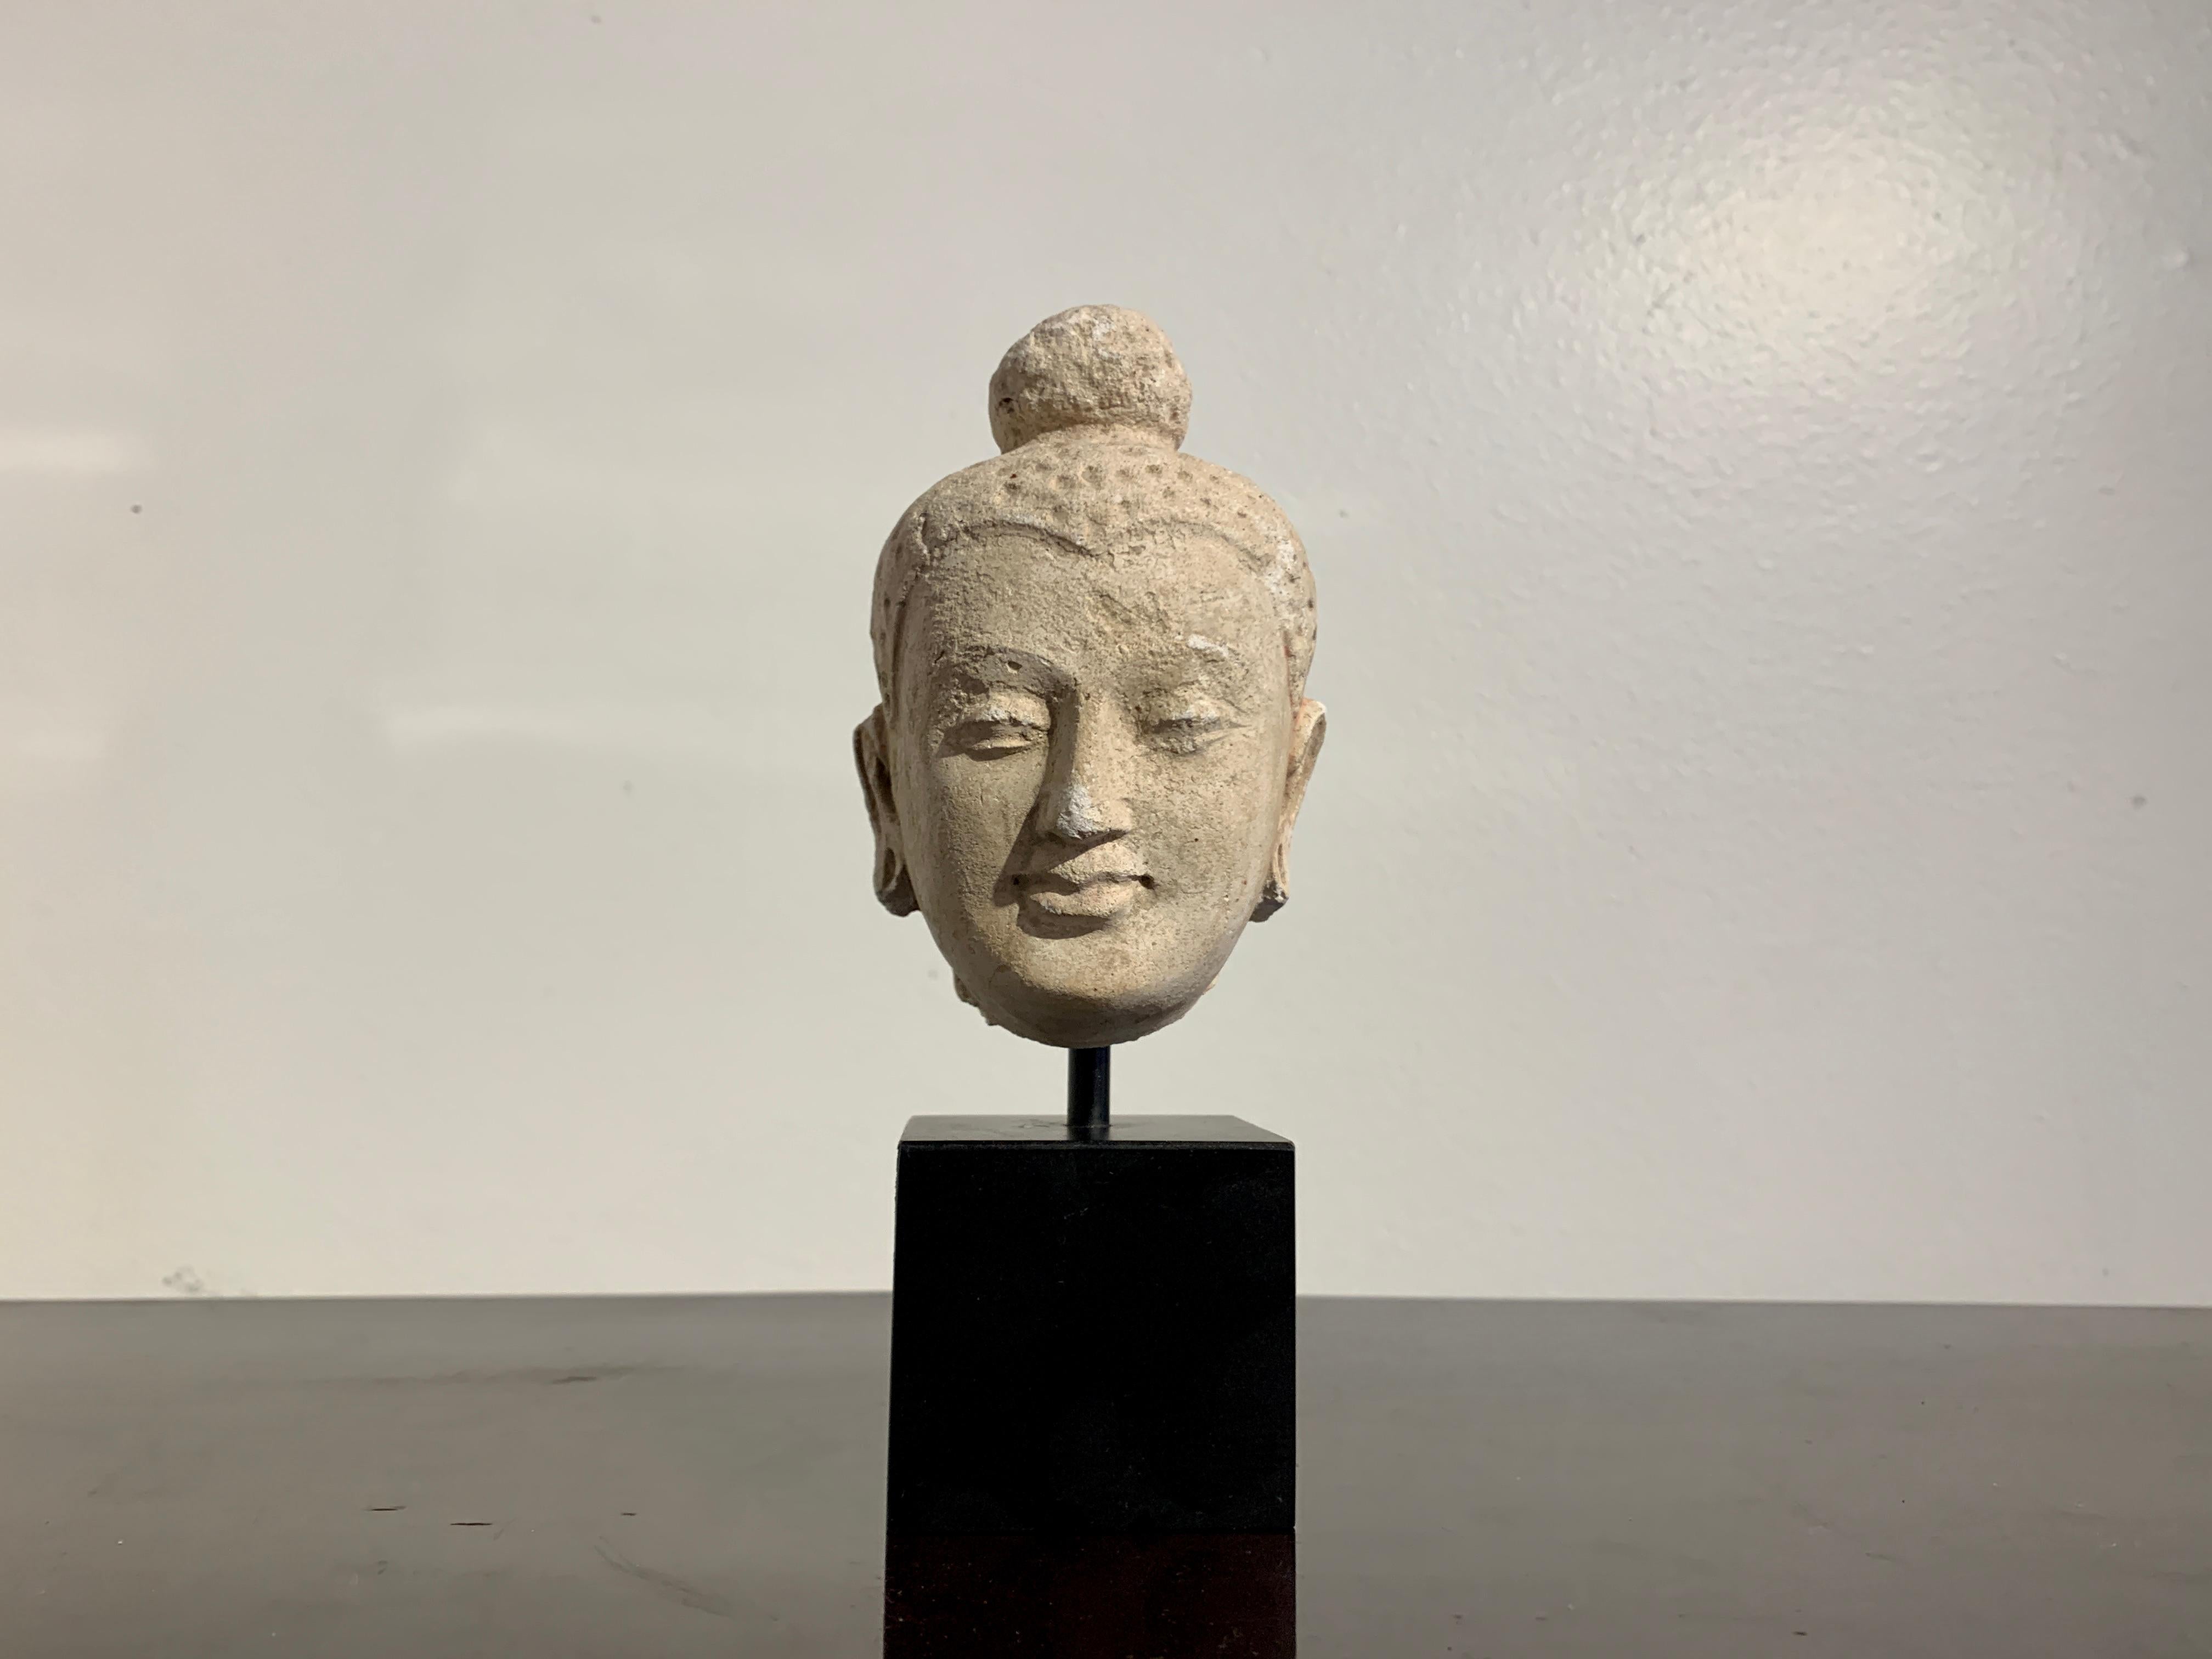 A lovely small stucco head of the Buddha, ancient region of Gandhara, probably Hadda, 5th to 6th century, modern day Afghanistan. 

Beautifully rendered, the small Gandharan Buddha head is sensitively molded with Fine features. The Buddha looks